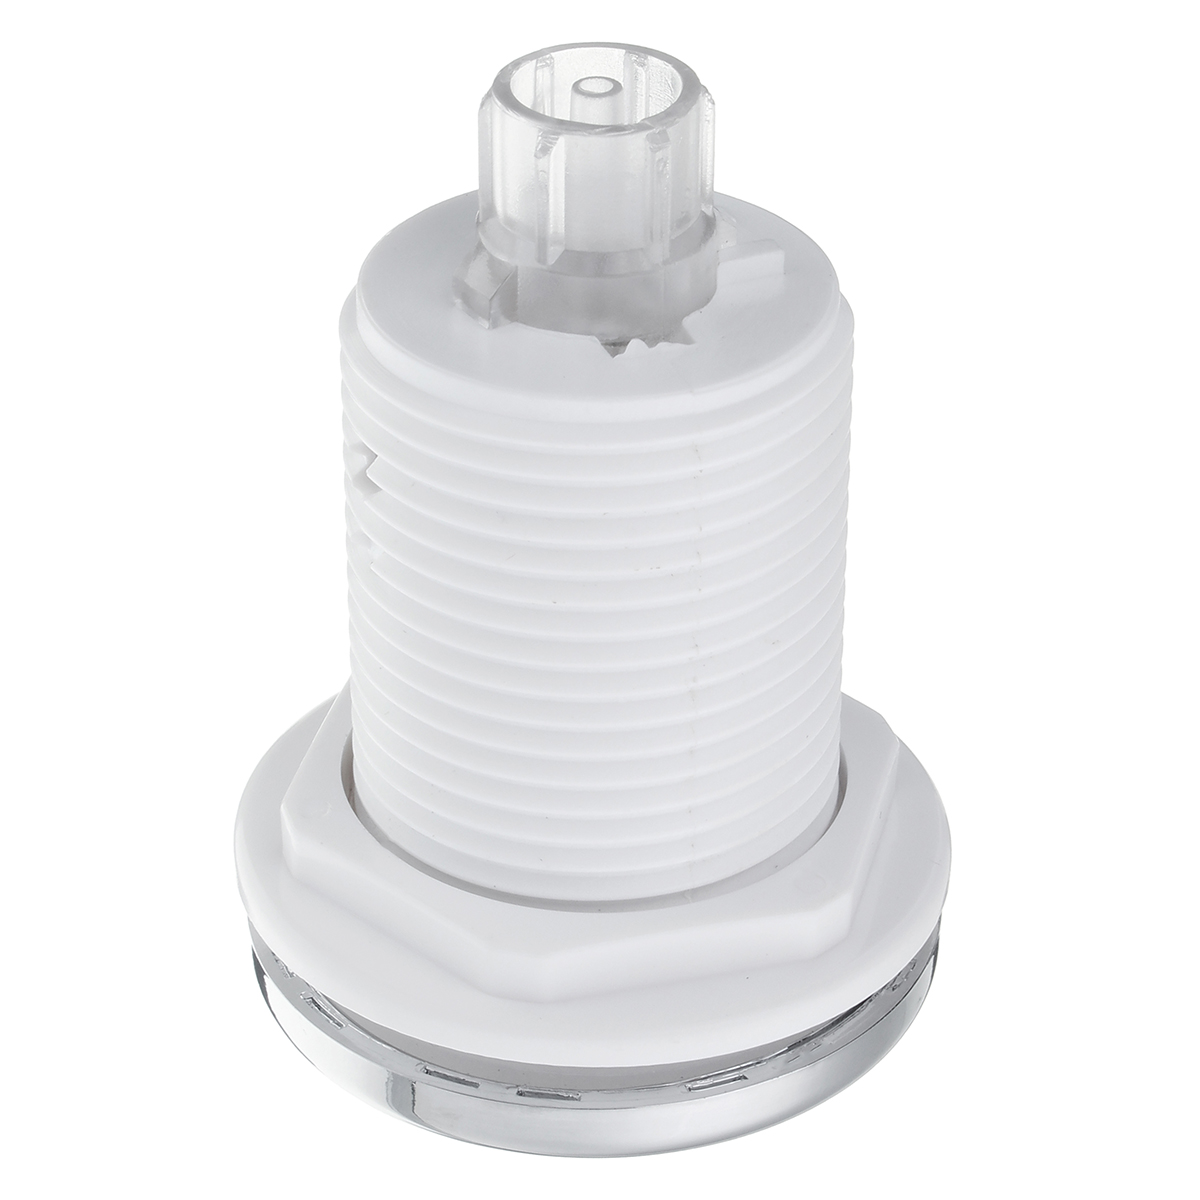 1PCS 32mm On Off Push Air Switch Button For Bathtub Spa Waste Garbage Disposal Whirlpool Pneumatic Switch Color: 32mm